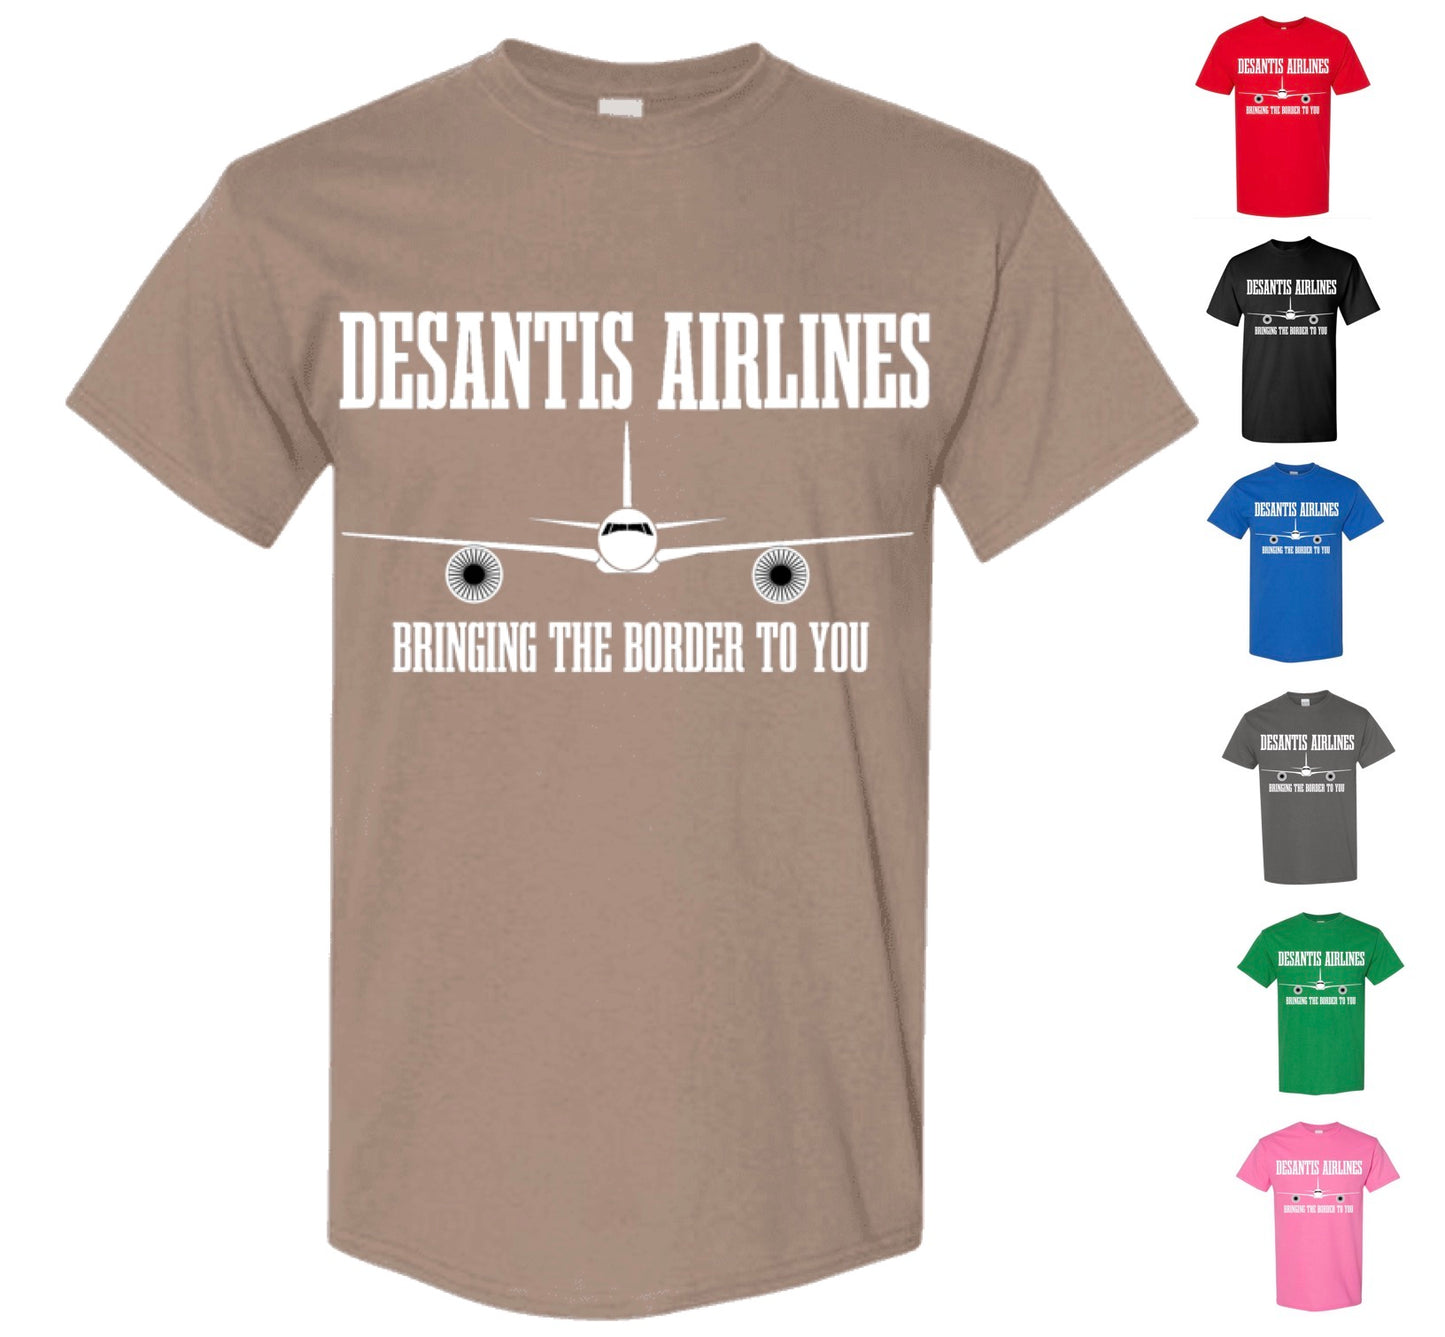 DeSantis Airlines T-Shirt, Bringing The Border To You!